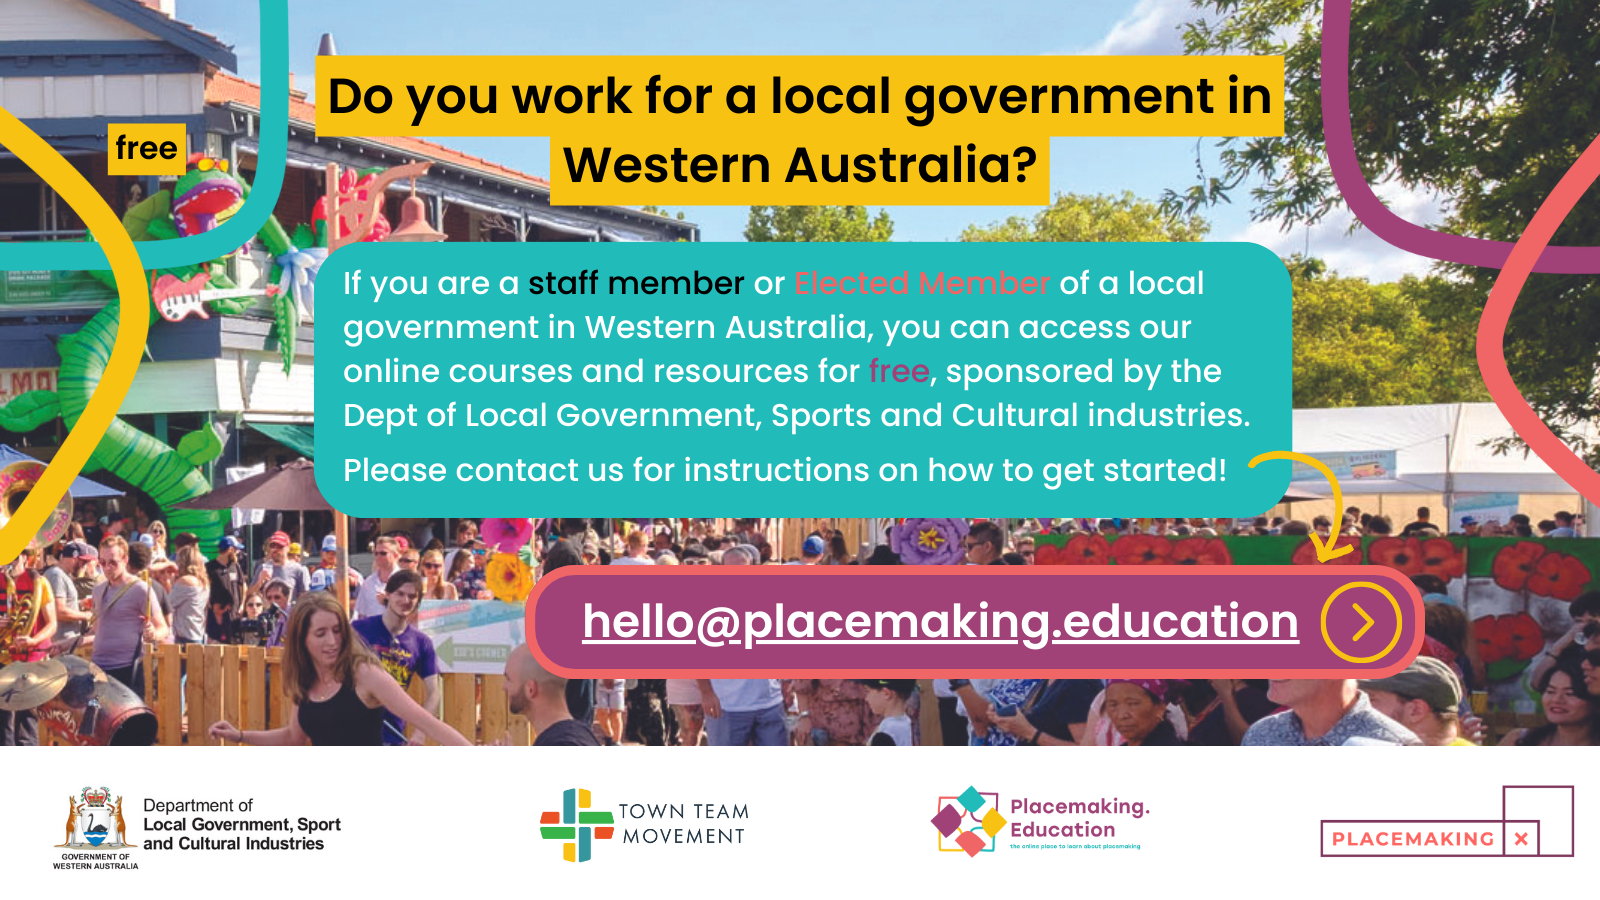 Do you work for a local government in Western Australia? WA local government staff can access the online courses and resources for free thanks to the sponsorship by the Department of Local Government, Sport and Cultural Industries